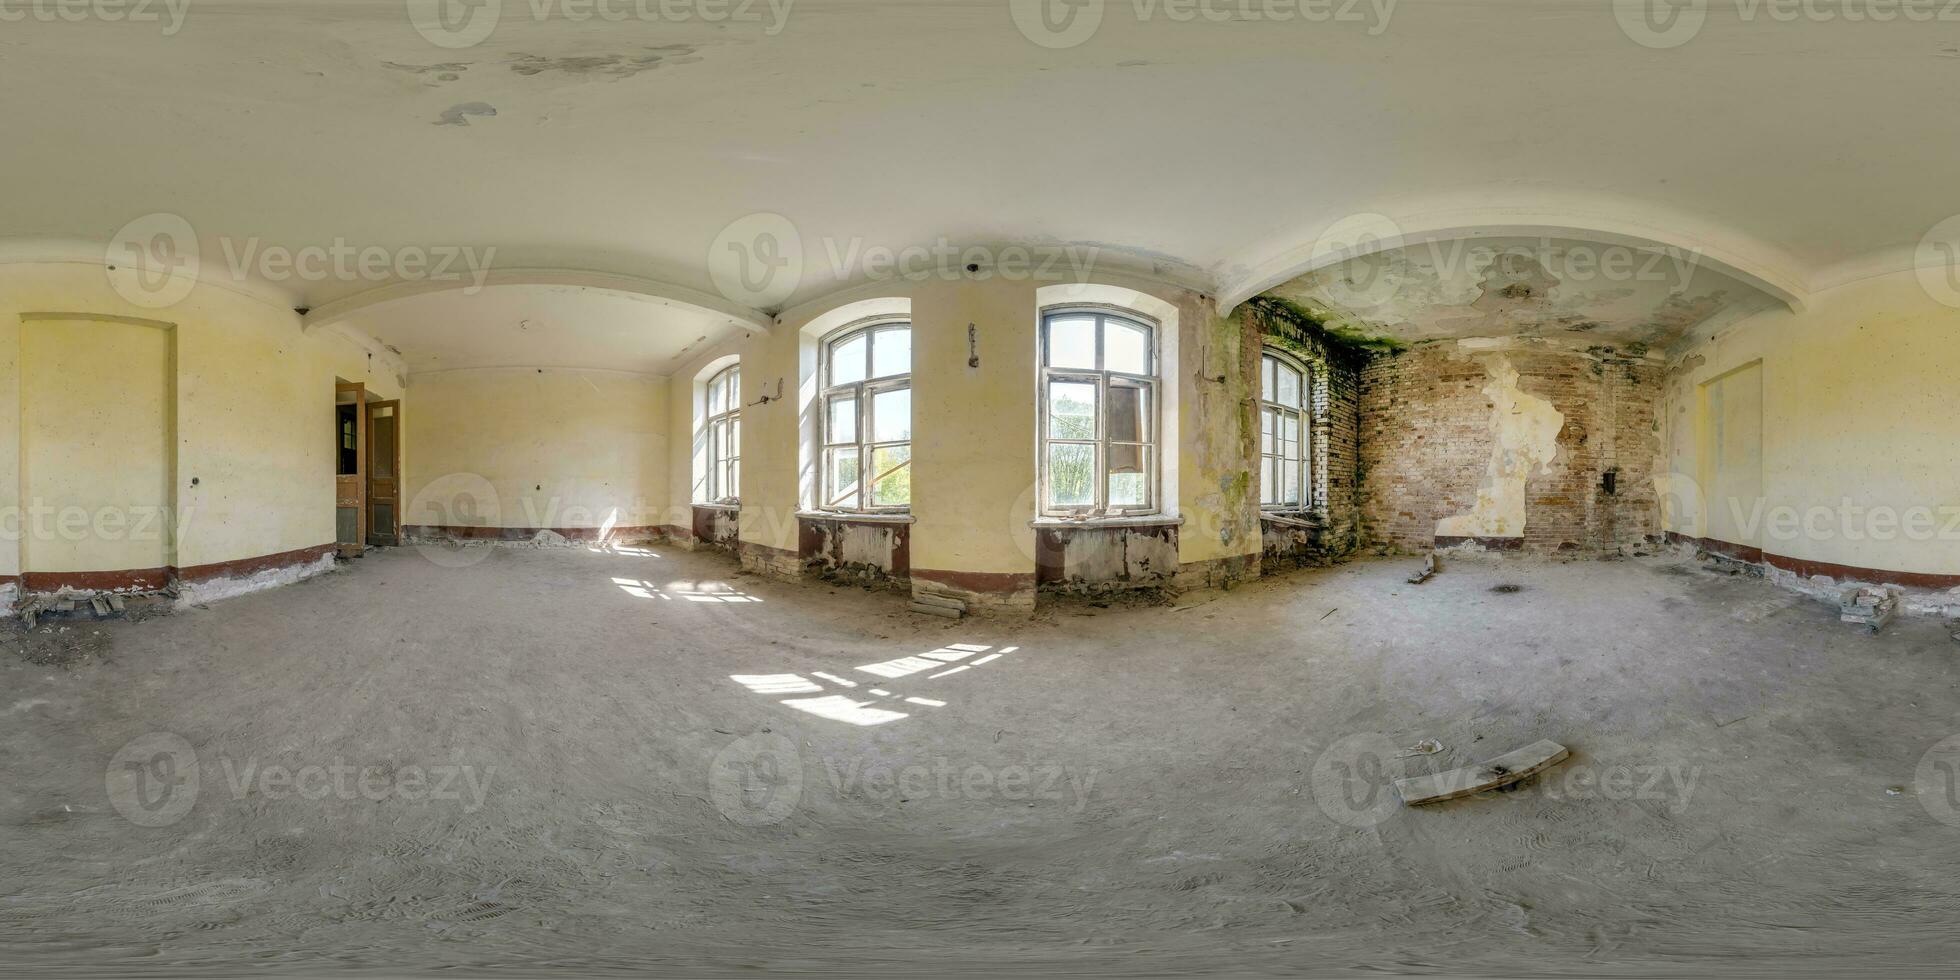 360 hdri panorama inside empty abandoned concrete room or old building in seamless spherical in equirectangular projection, ready AR VR virtual reality content photo